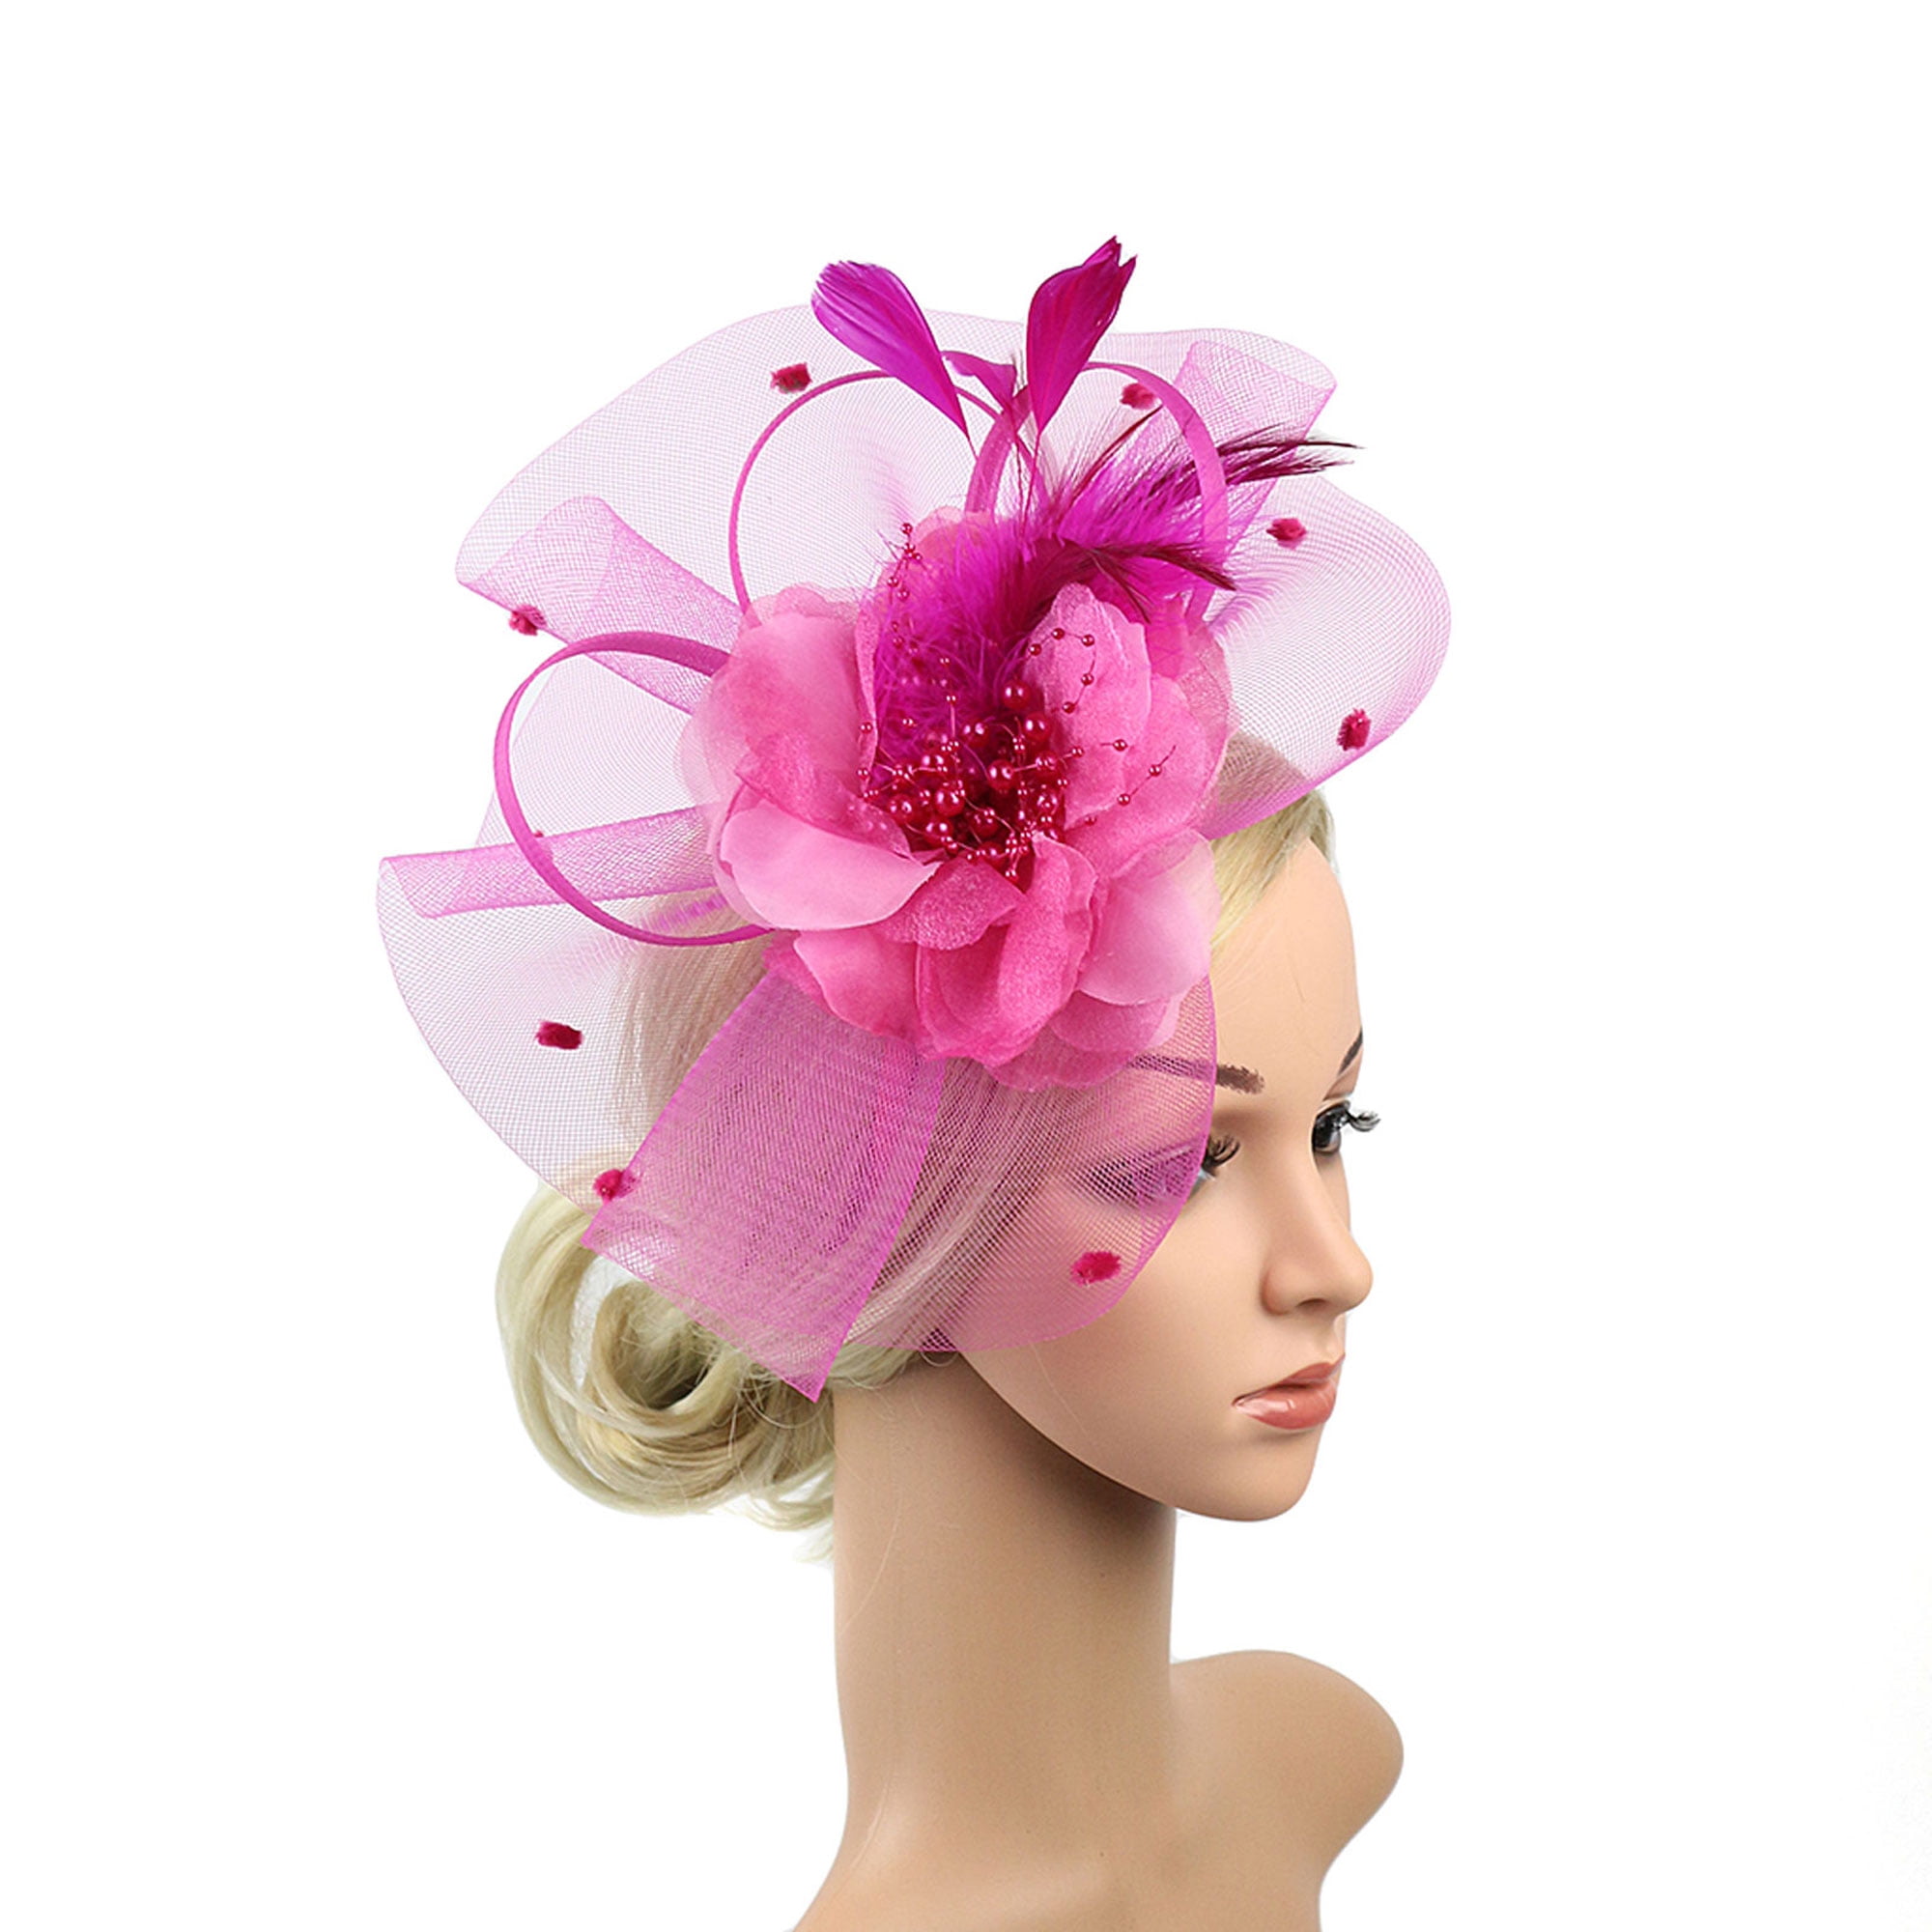 Vintage Women Sinamay Hairpin Fascinator with Cocktail Party Derby Wedding Hat 